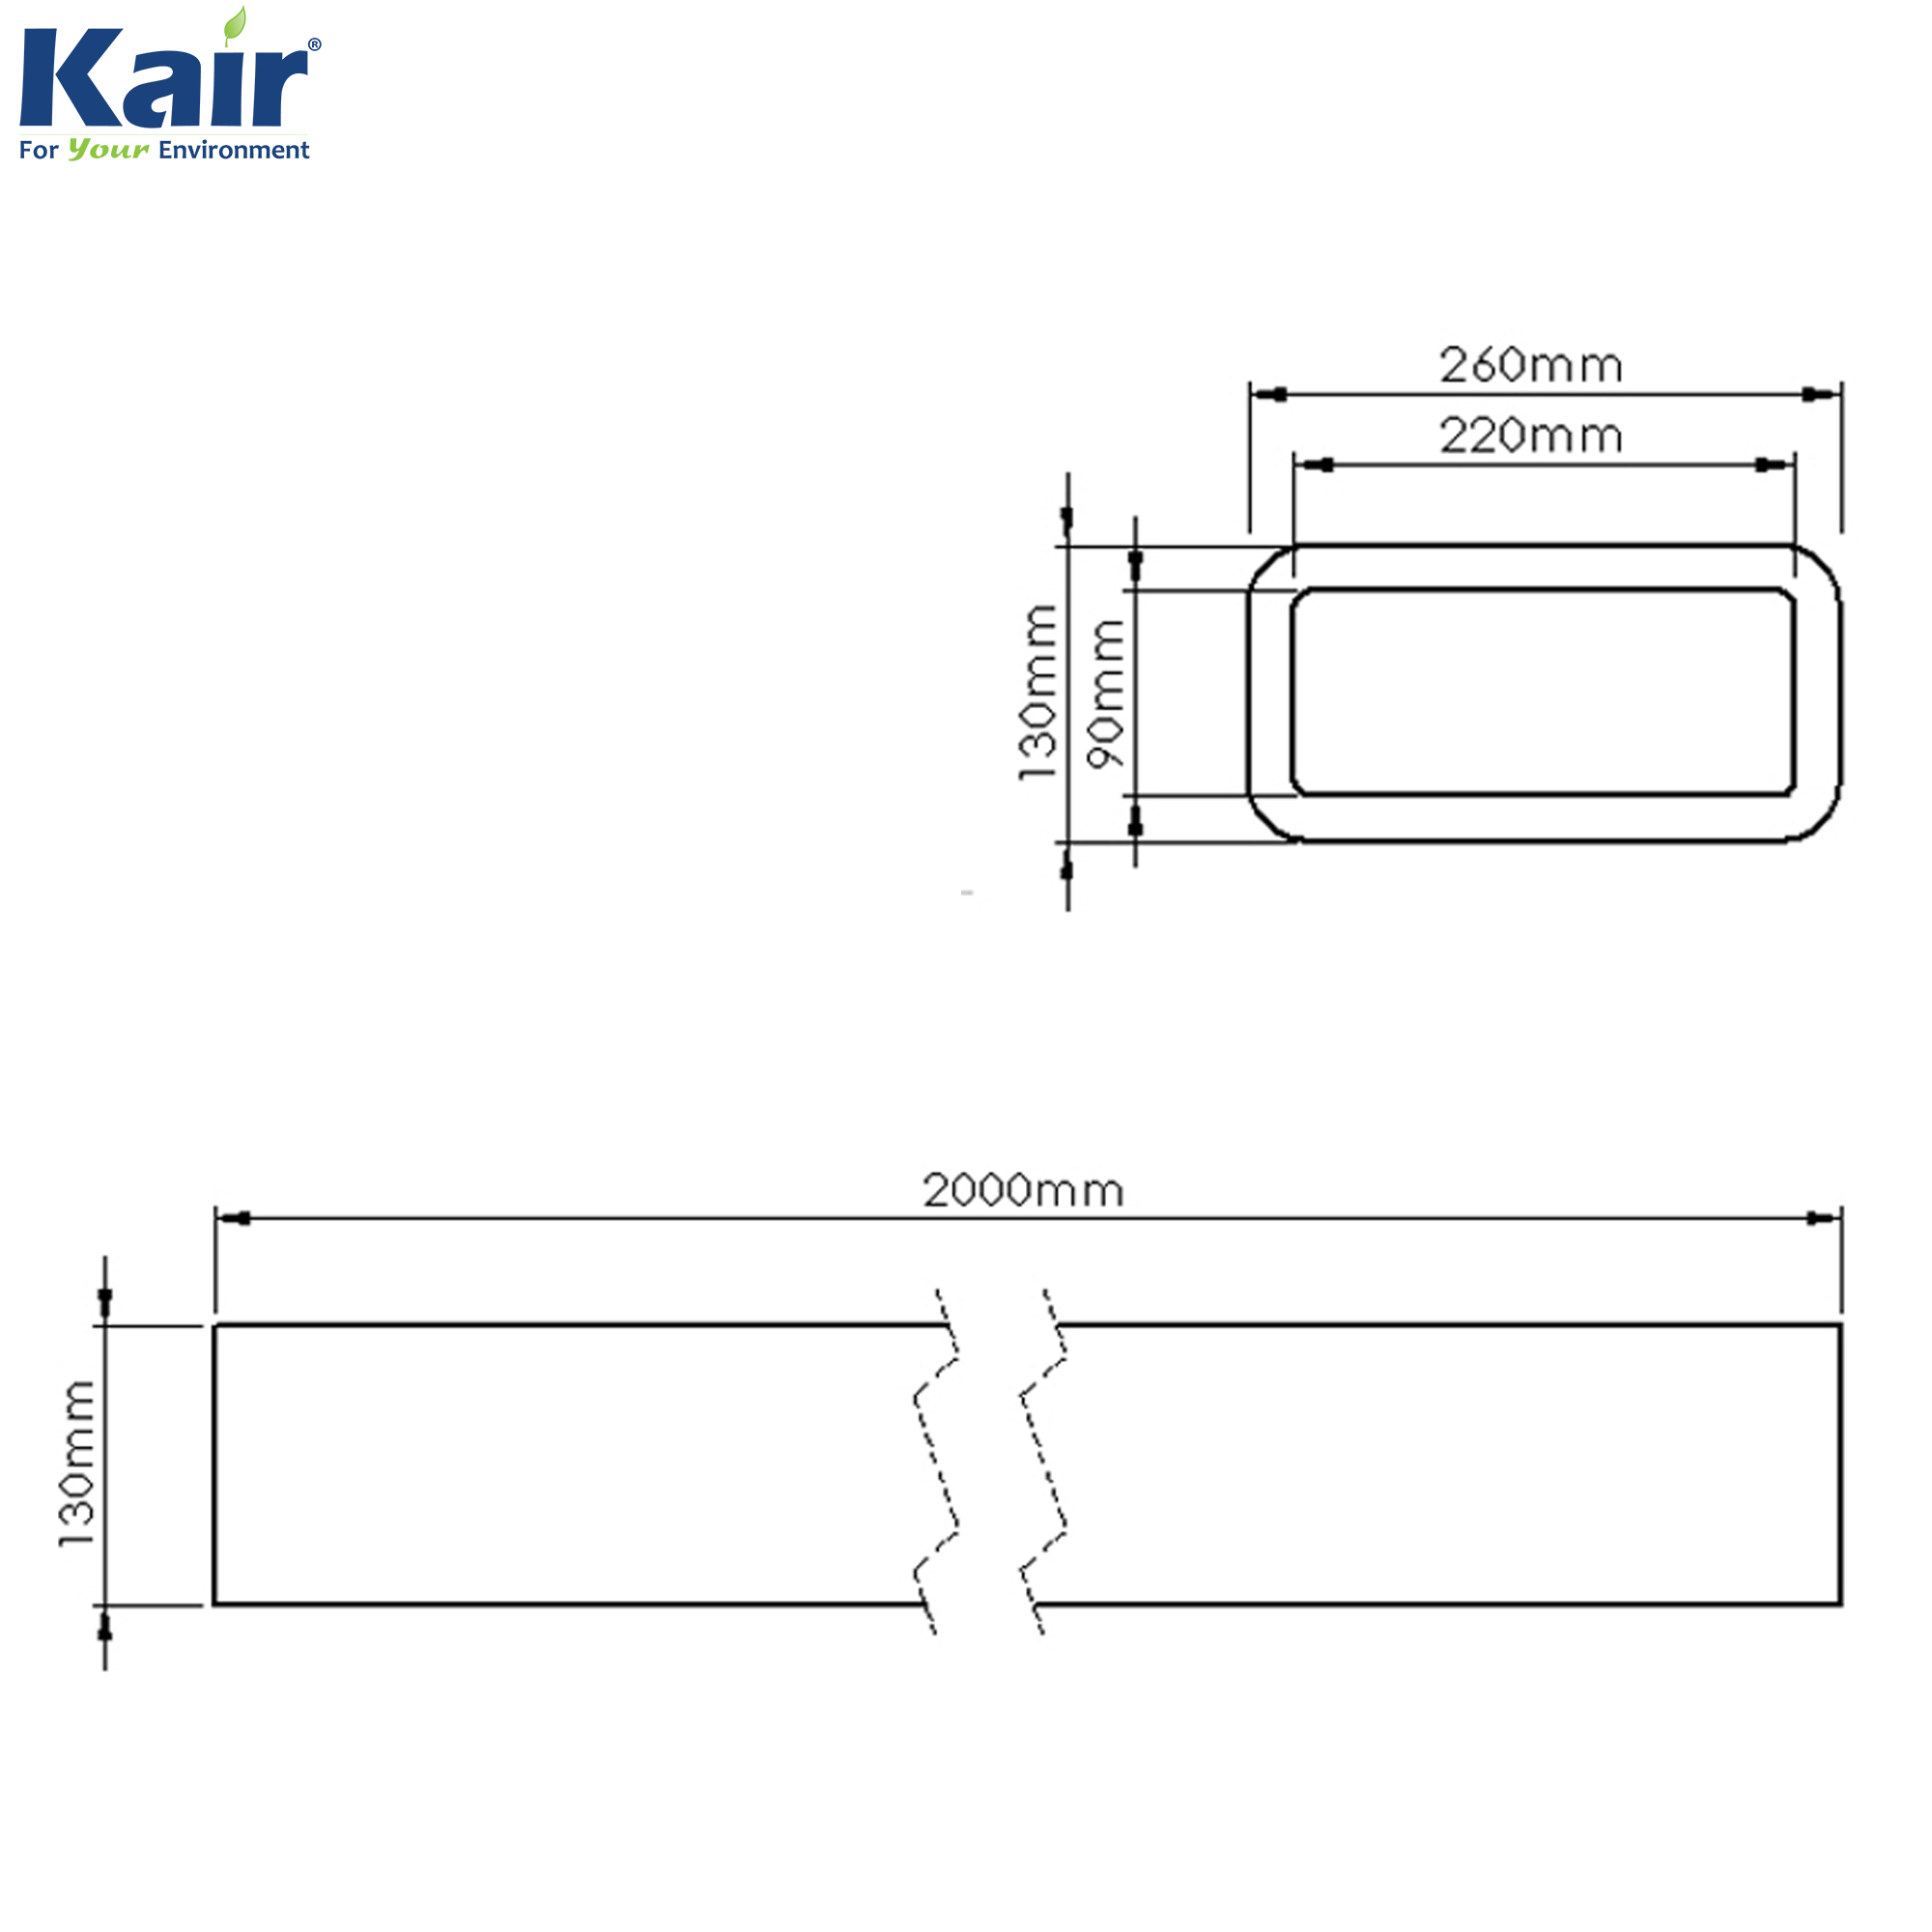 Box of 6 x Kair Self-Seal Thermal Ducting 220X90mm 2 Metre Lengths Complete With 2 Male Duct To Duct Connectors